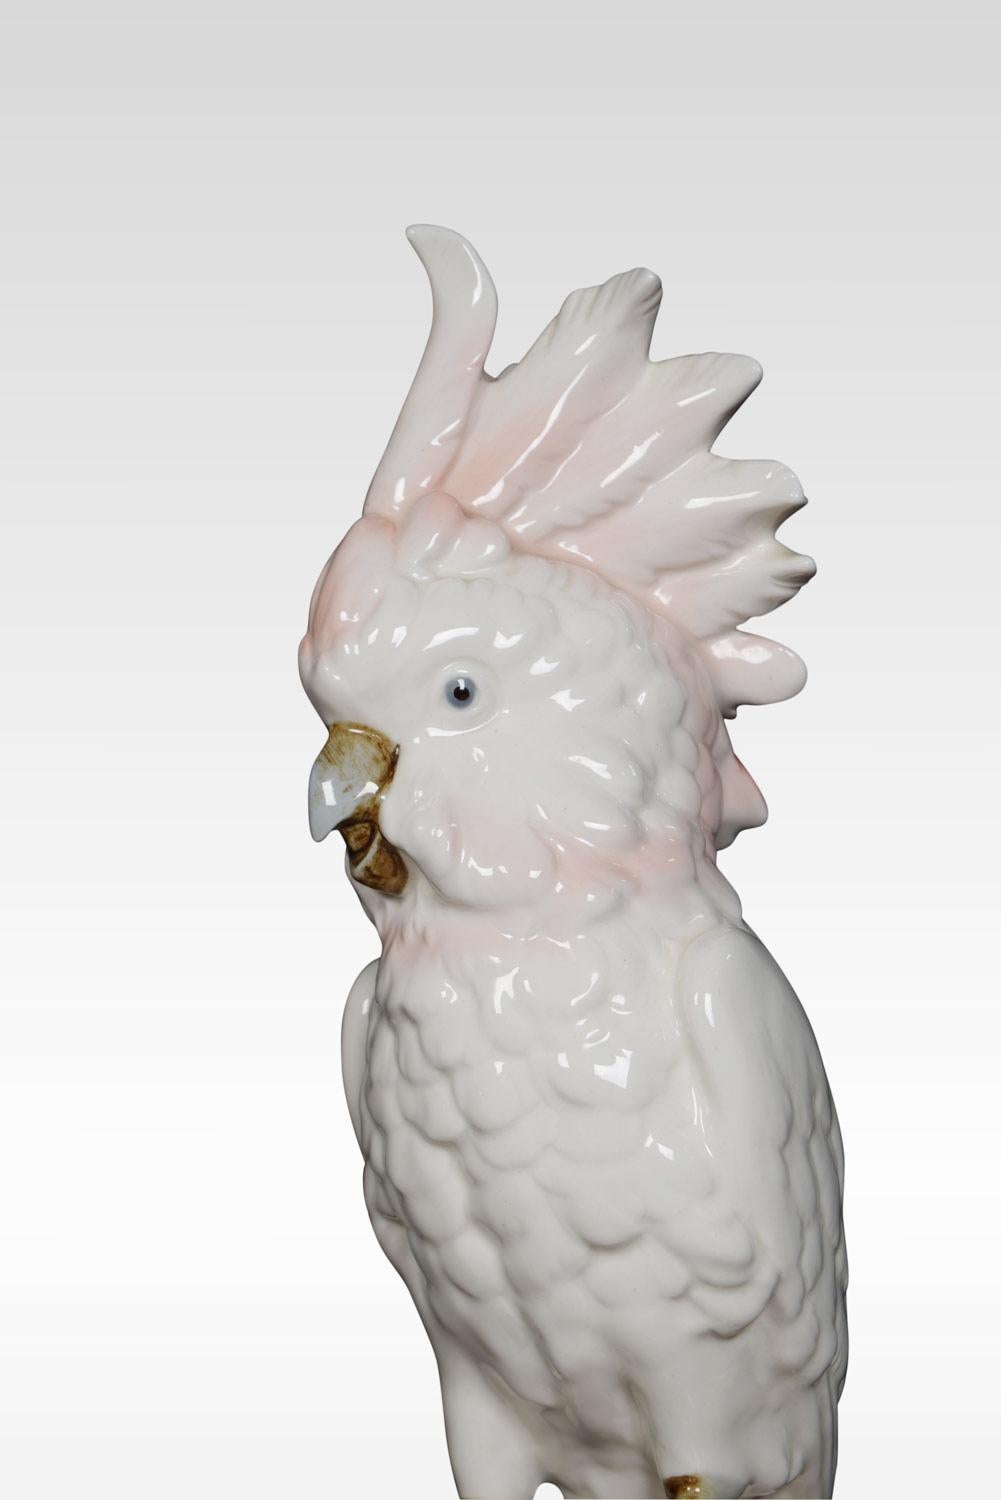 Mid-20th century Royal Dux porcelain figure of a cockatoo. The cockatoo is displaying it’s crest and is sitting on a branch with flowers underneath. The bottoms marked with all the appropriate Royal Dux insignia.
Dimensions:
Height 16.5